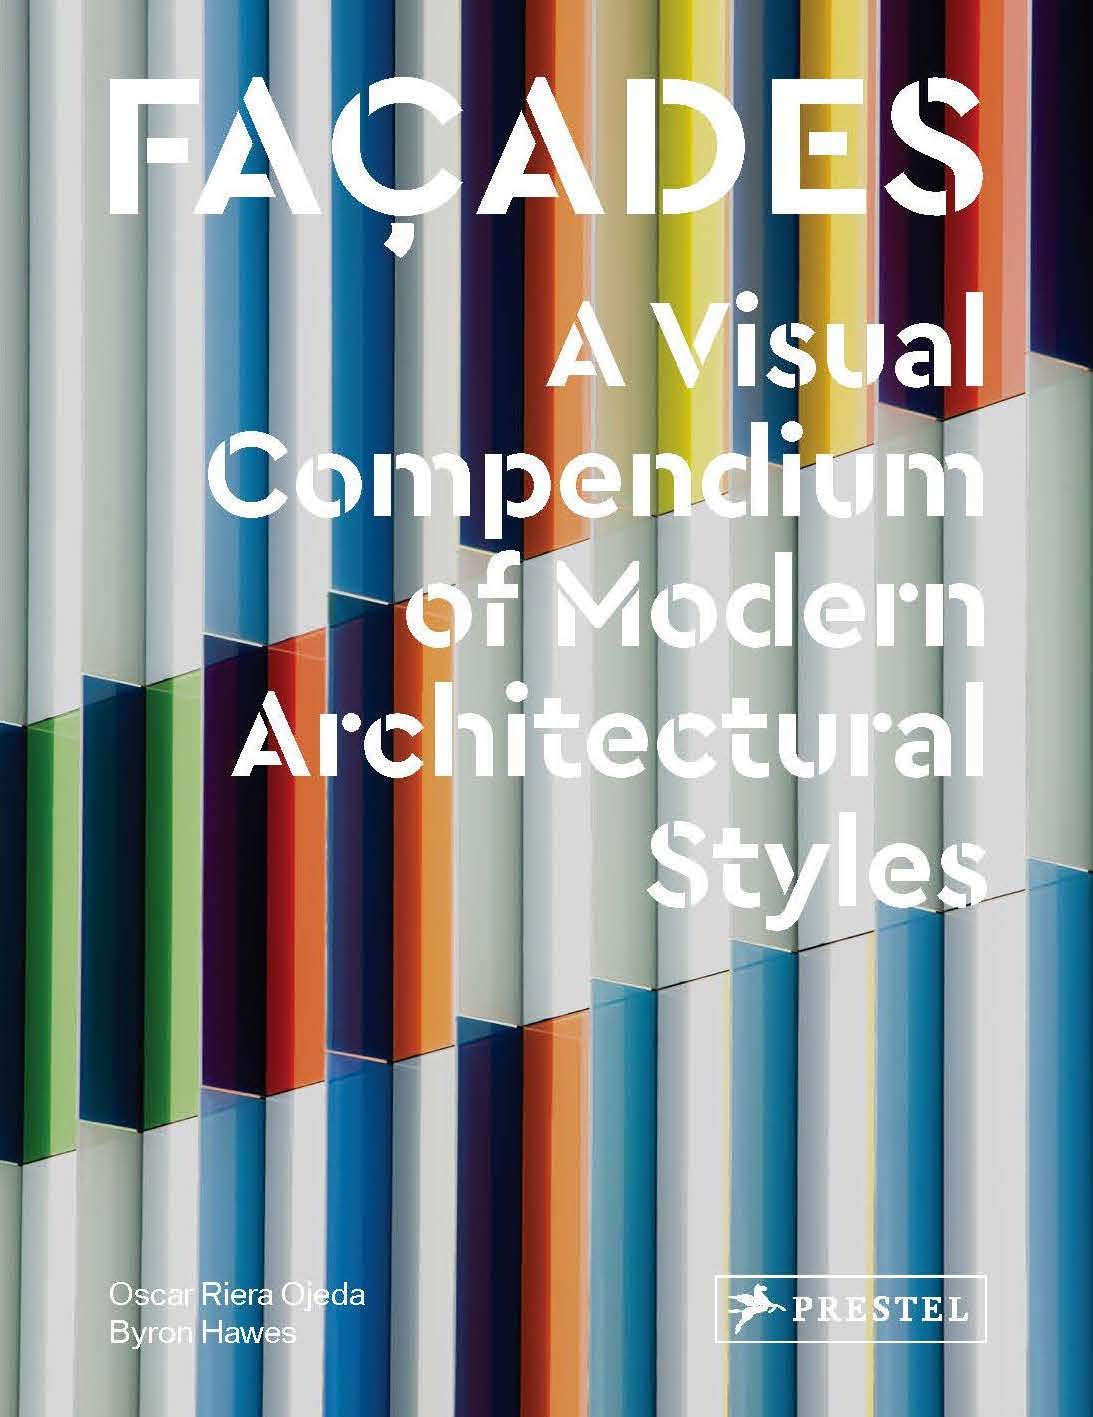 Facades. A Visual Compendium of Modern Architectural Styles where architects stay in germany